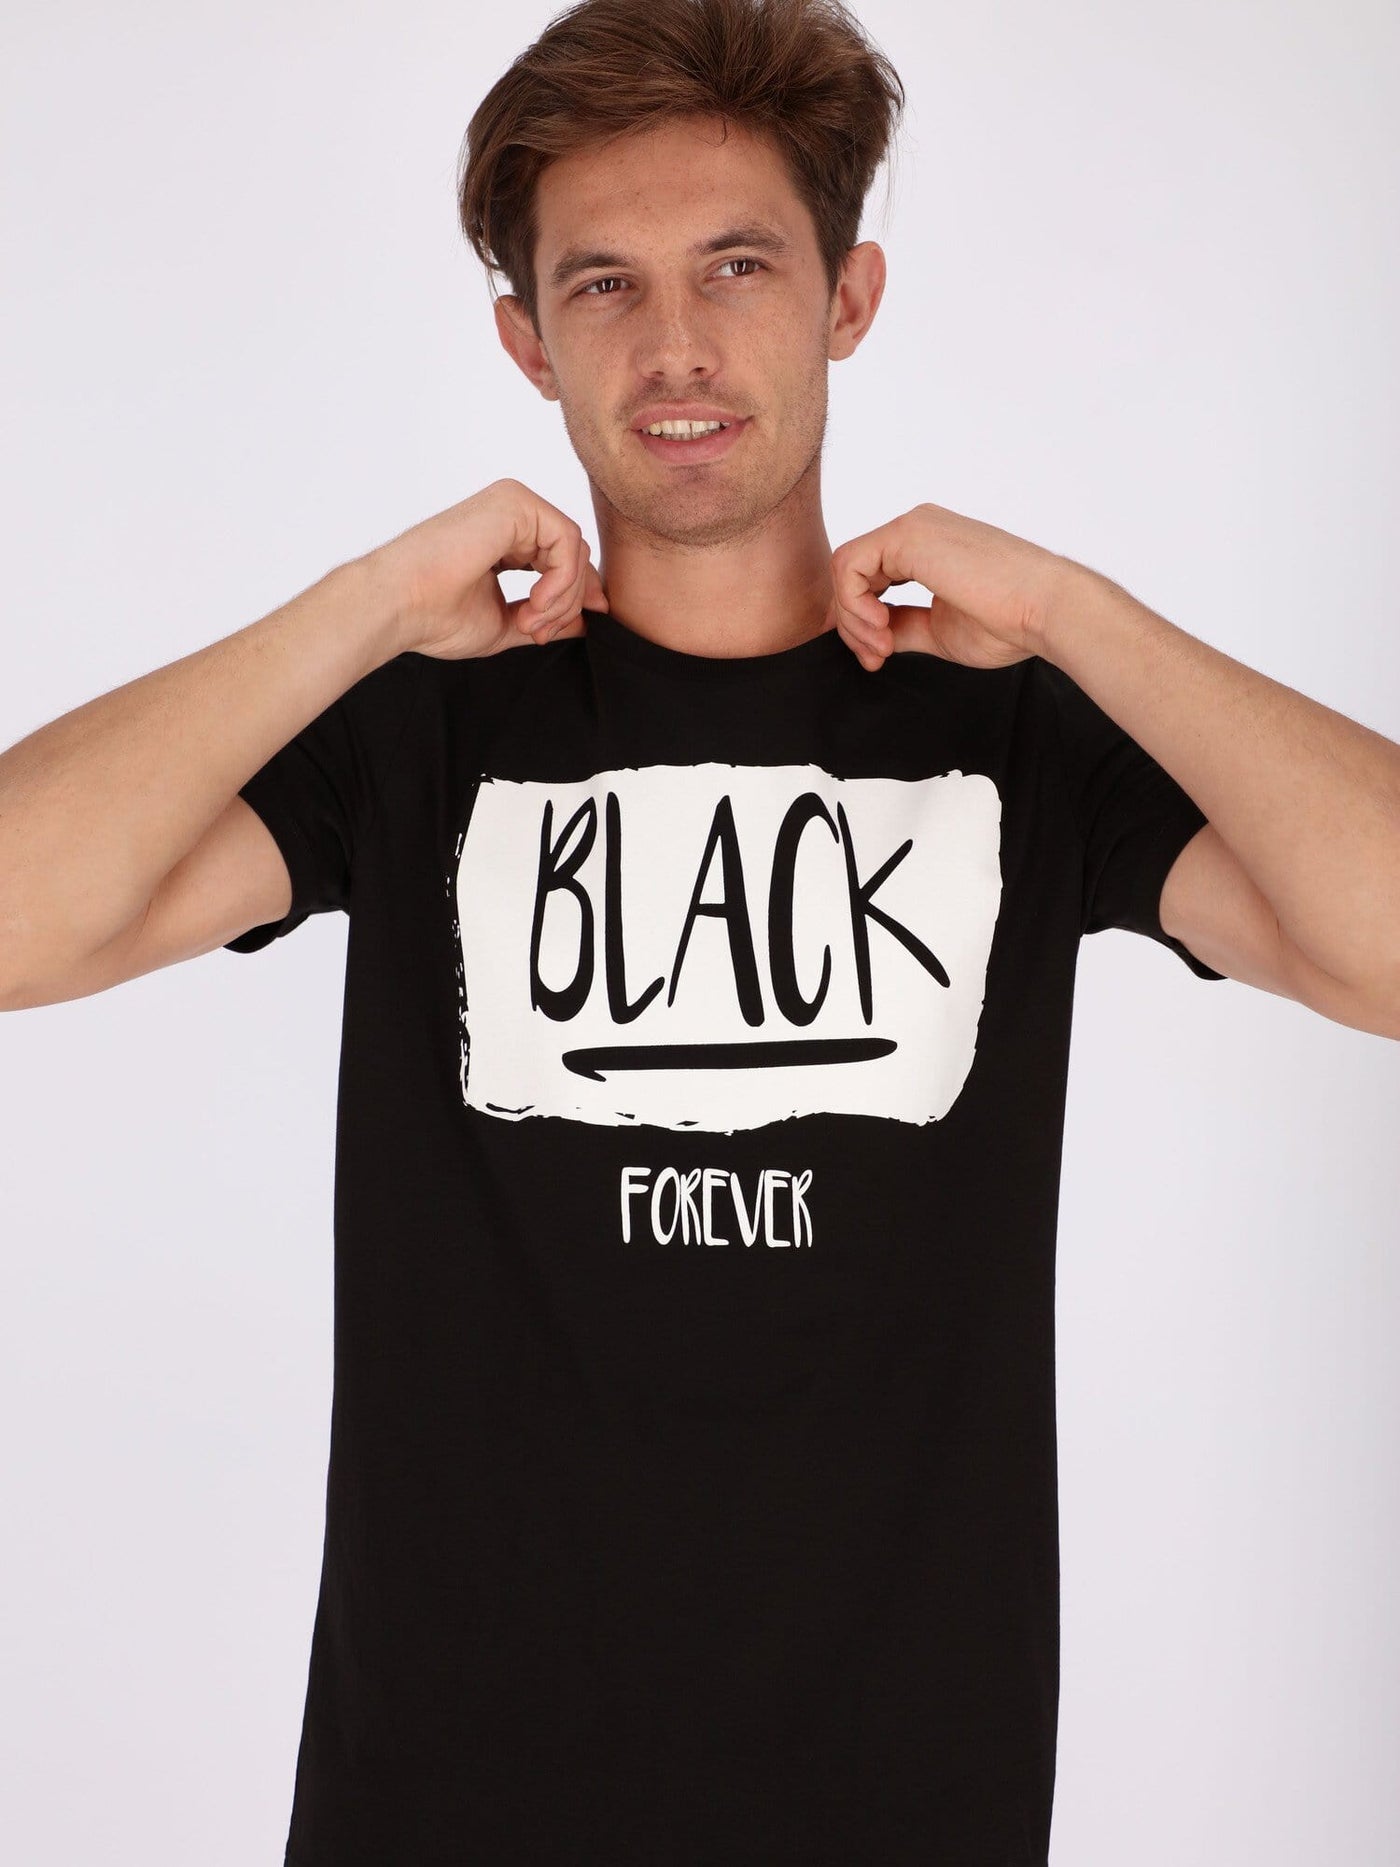 OR T-Shirts Black Forever Front Print Short Sleeve T-Shirt